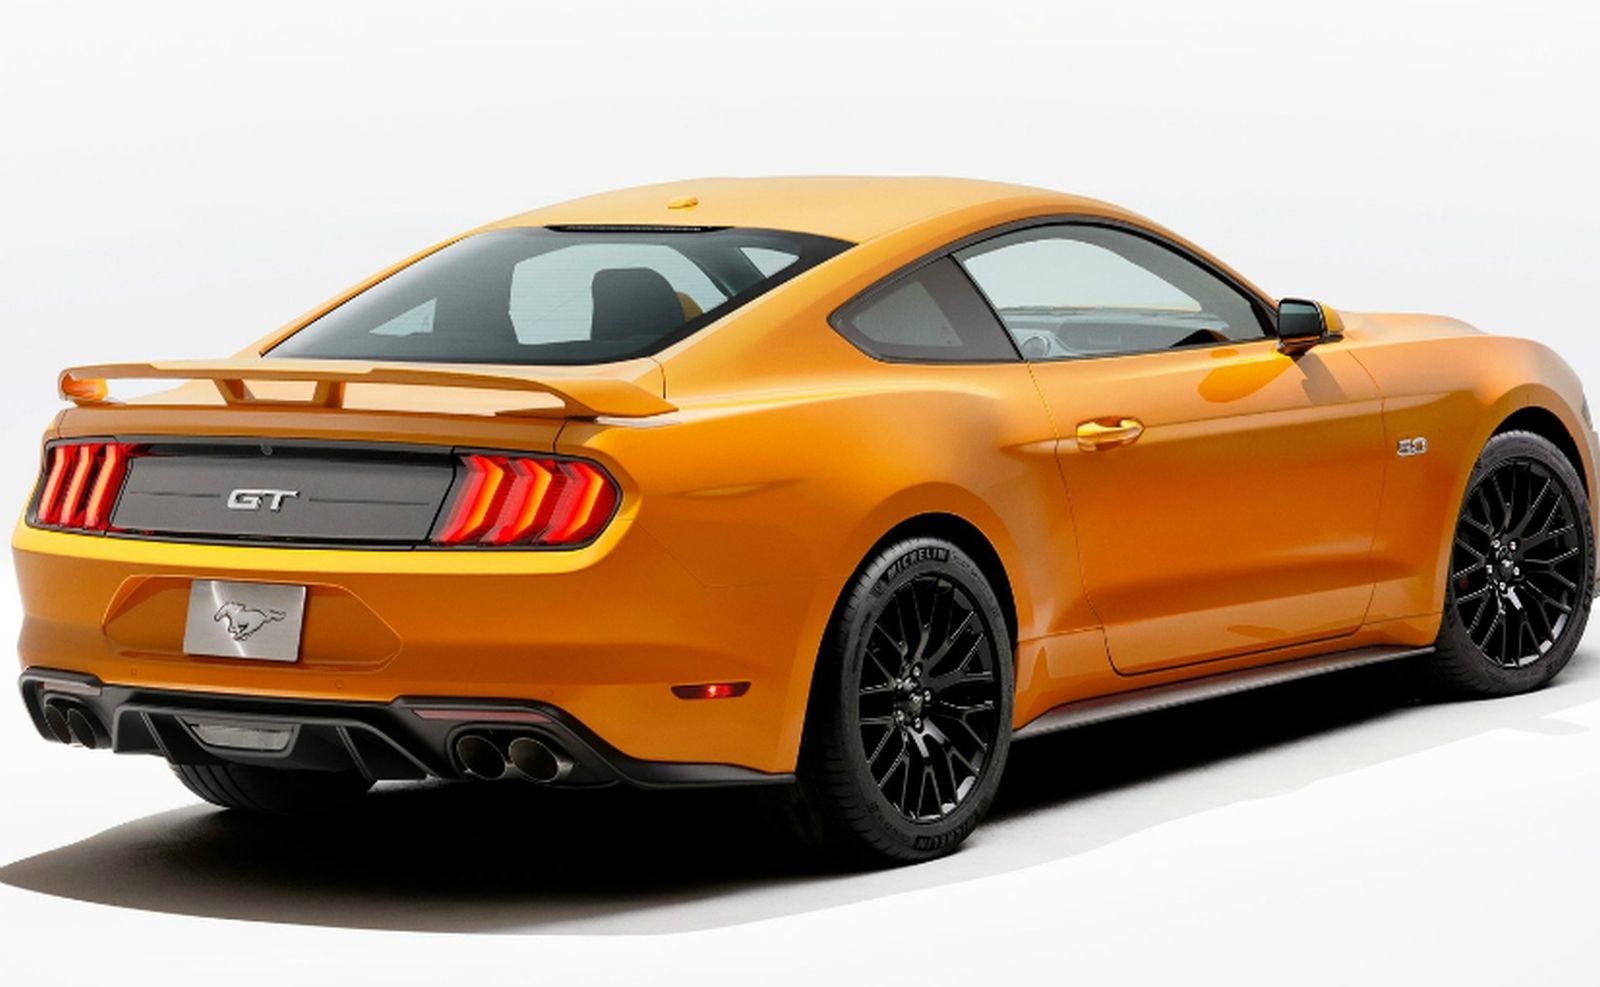 2018 Ford Mustang GT Facelift Side Rear Profile